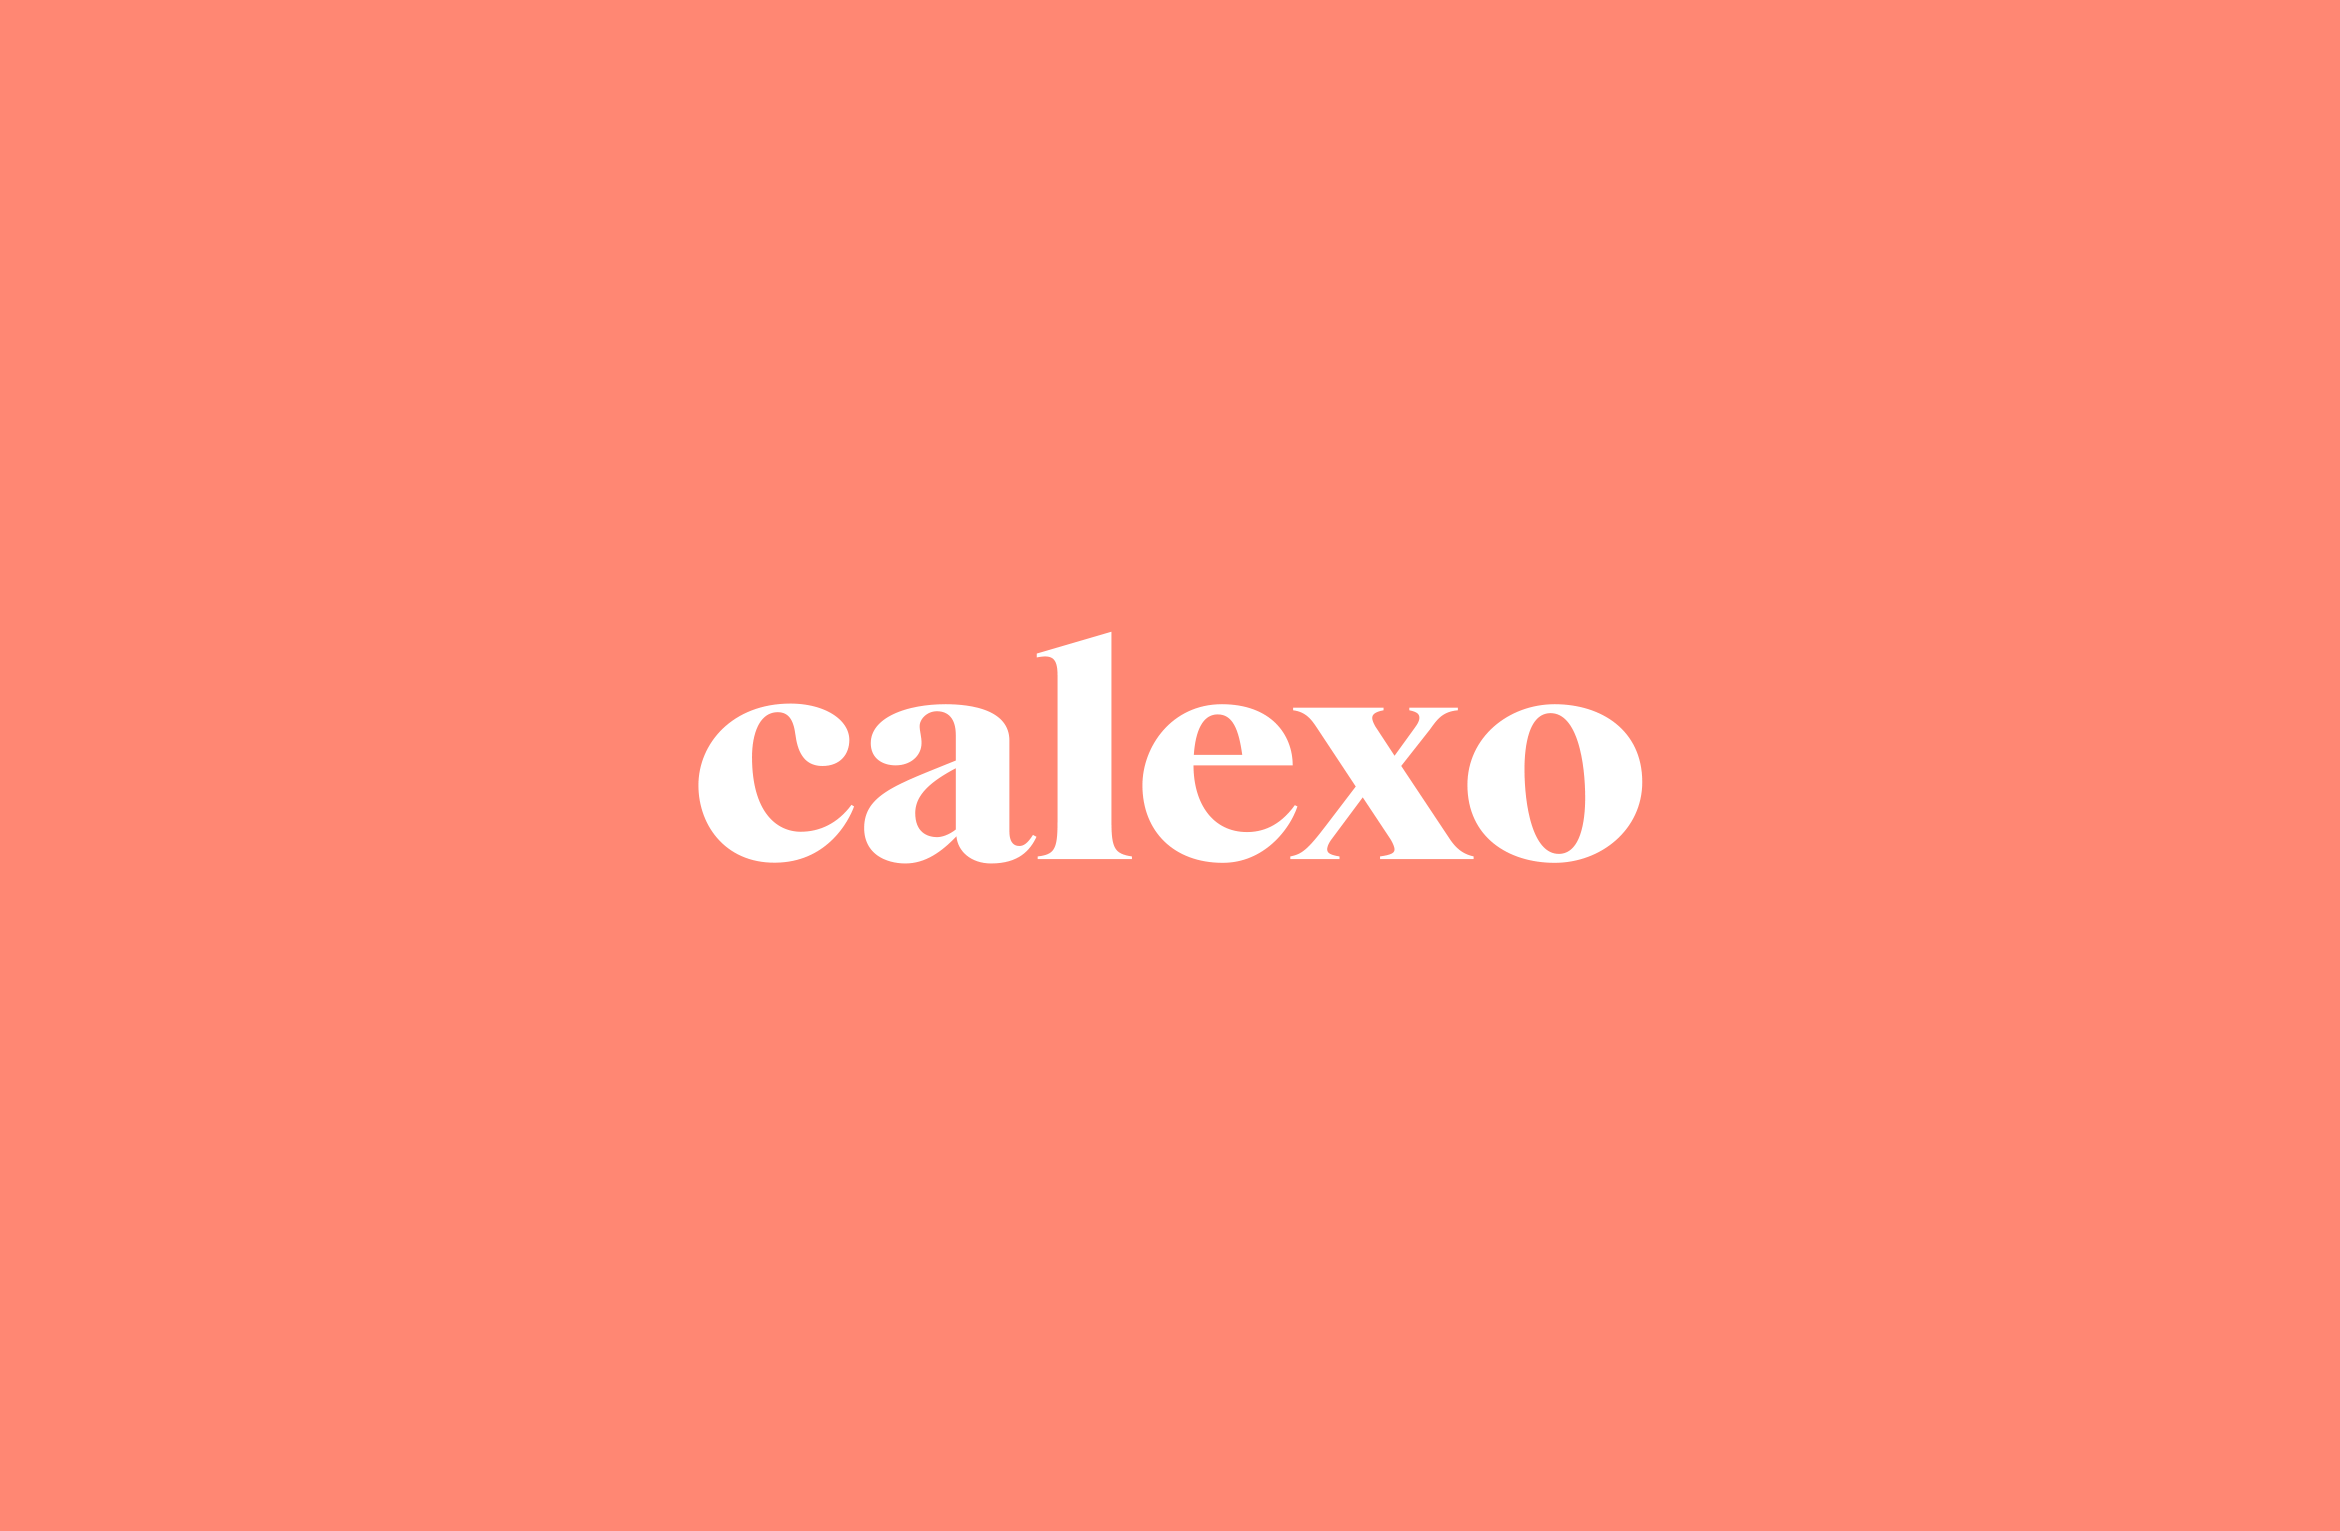 Packaging design and branding project by TRÜF for Calexo.